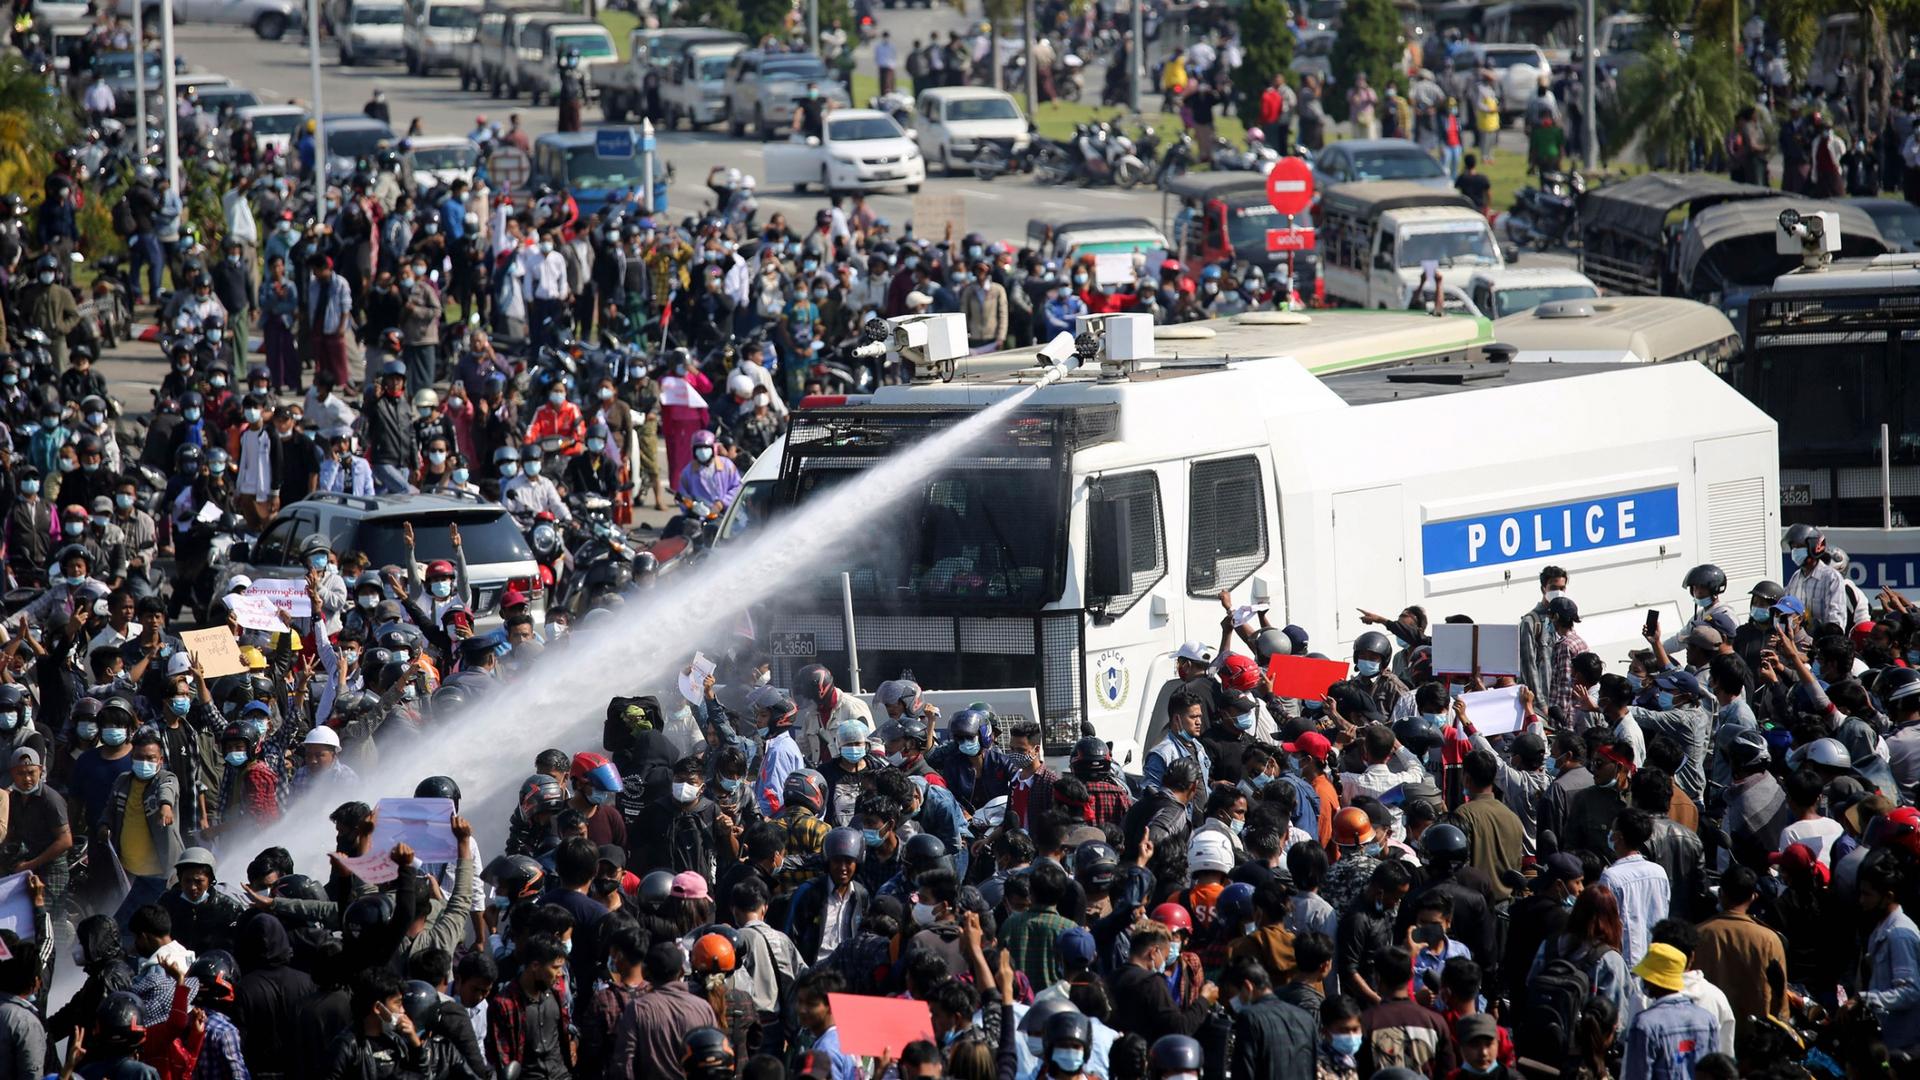 A large crowd of people are shown surrounding a police truck which is shooting a water cannon into the crowd.